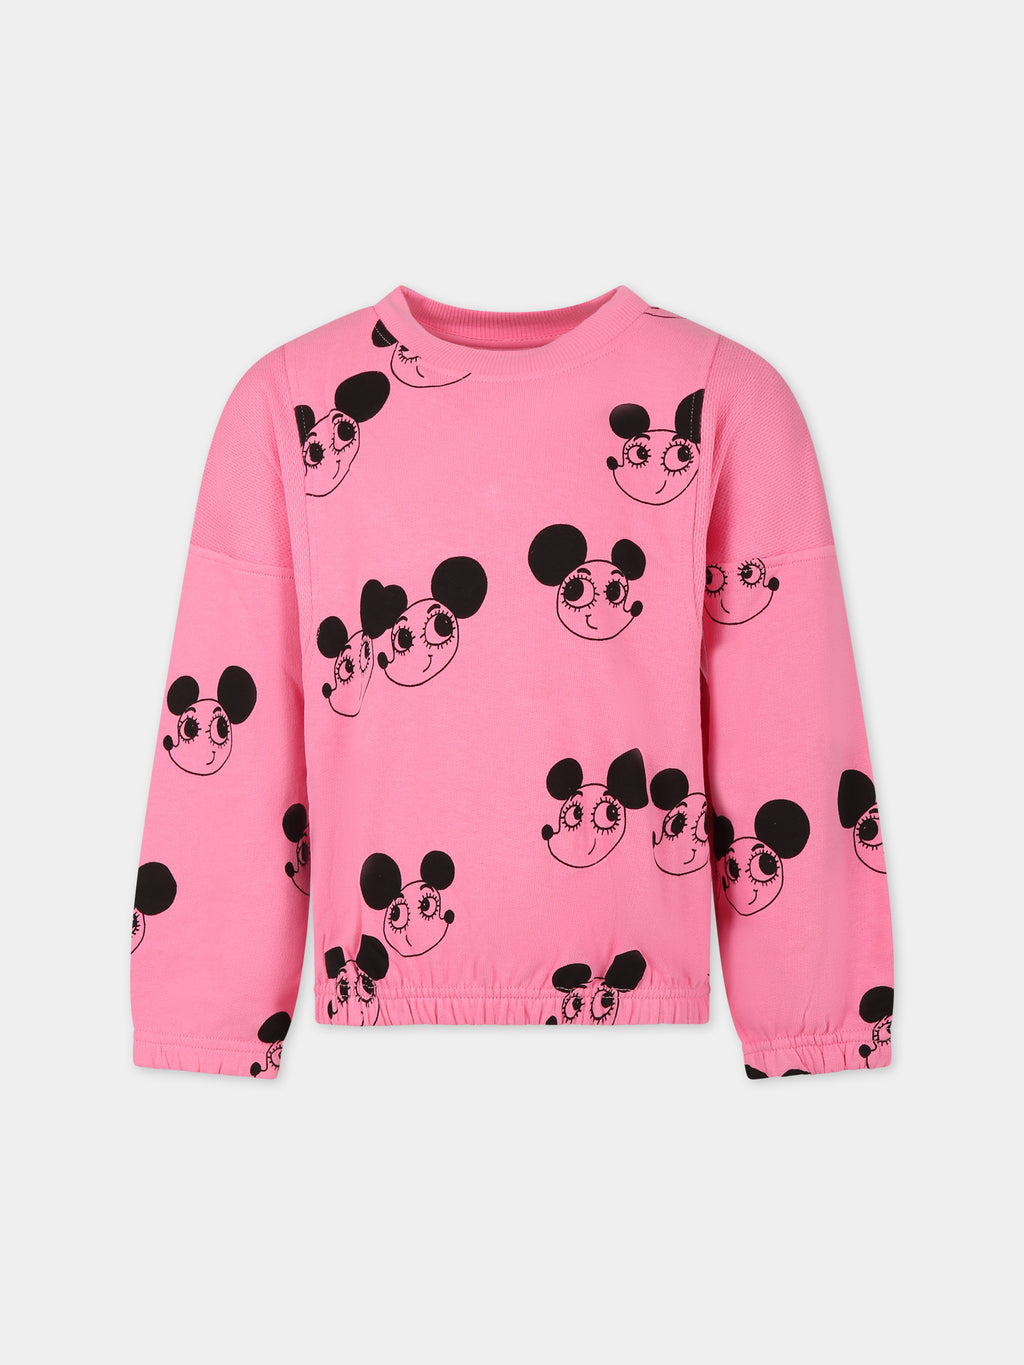 Pink sweatshirt for girl with mice